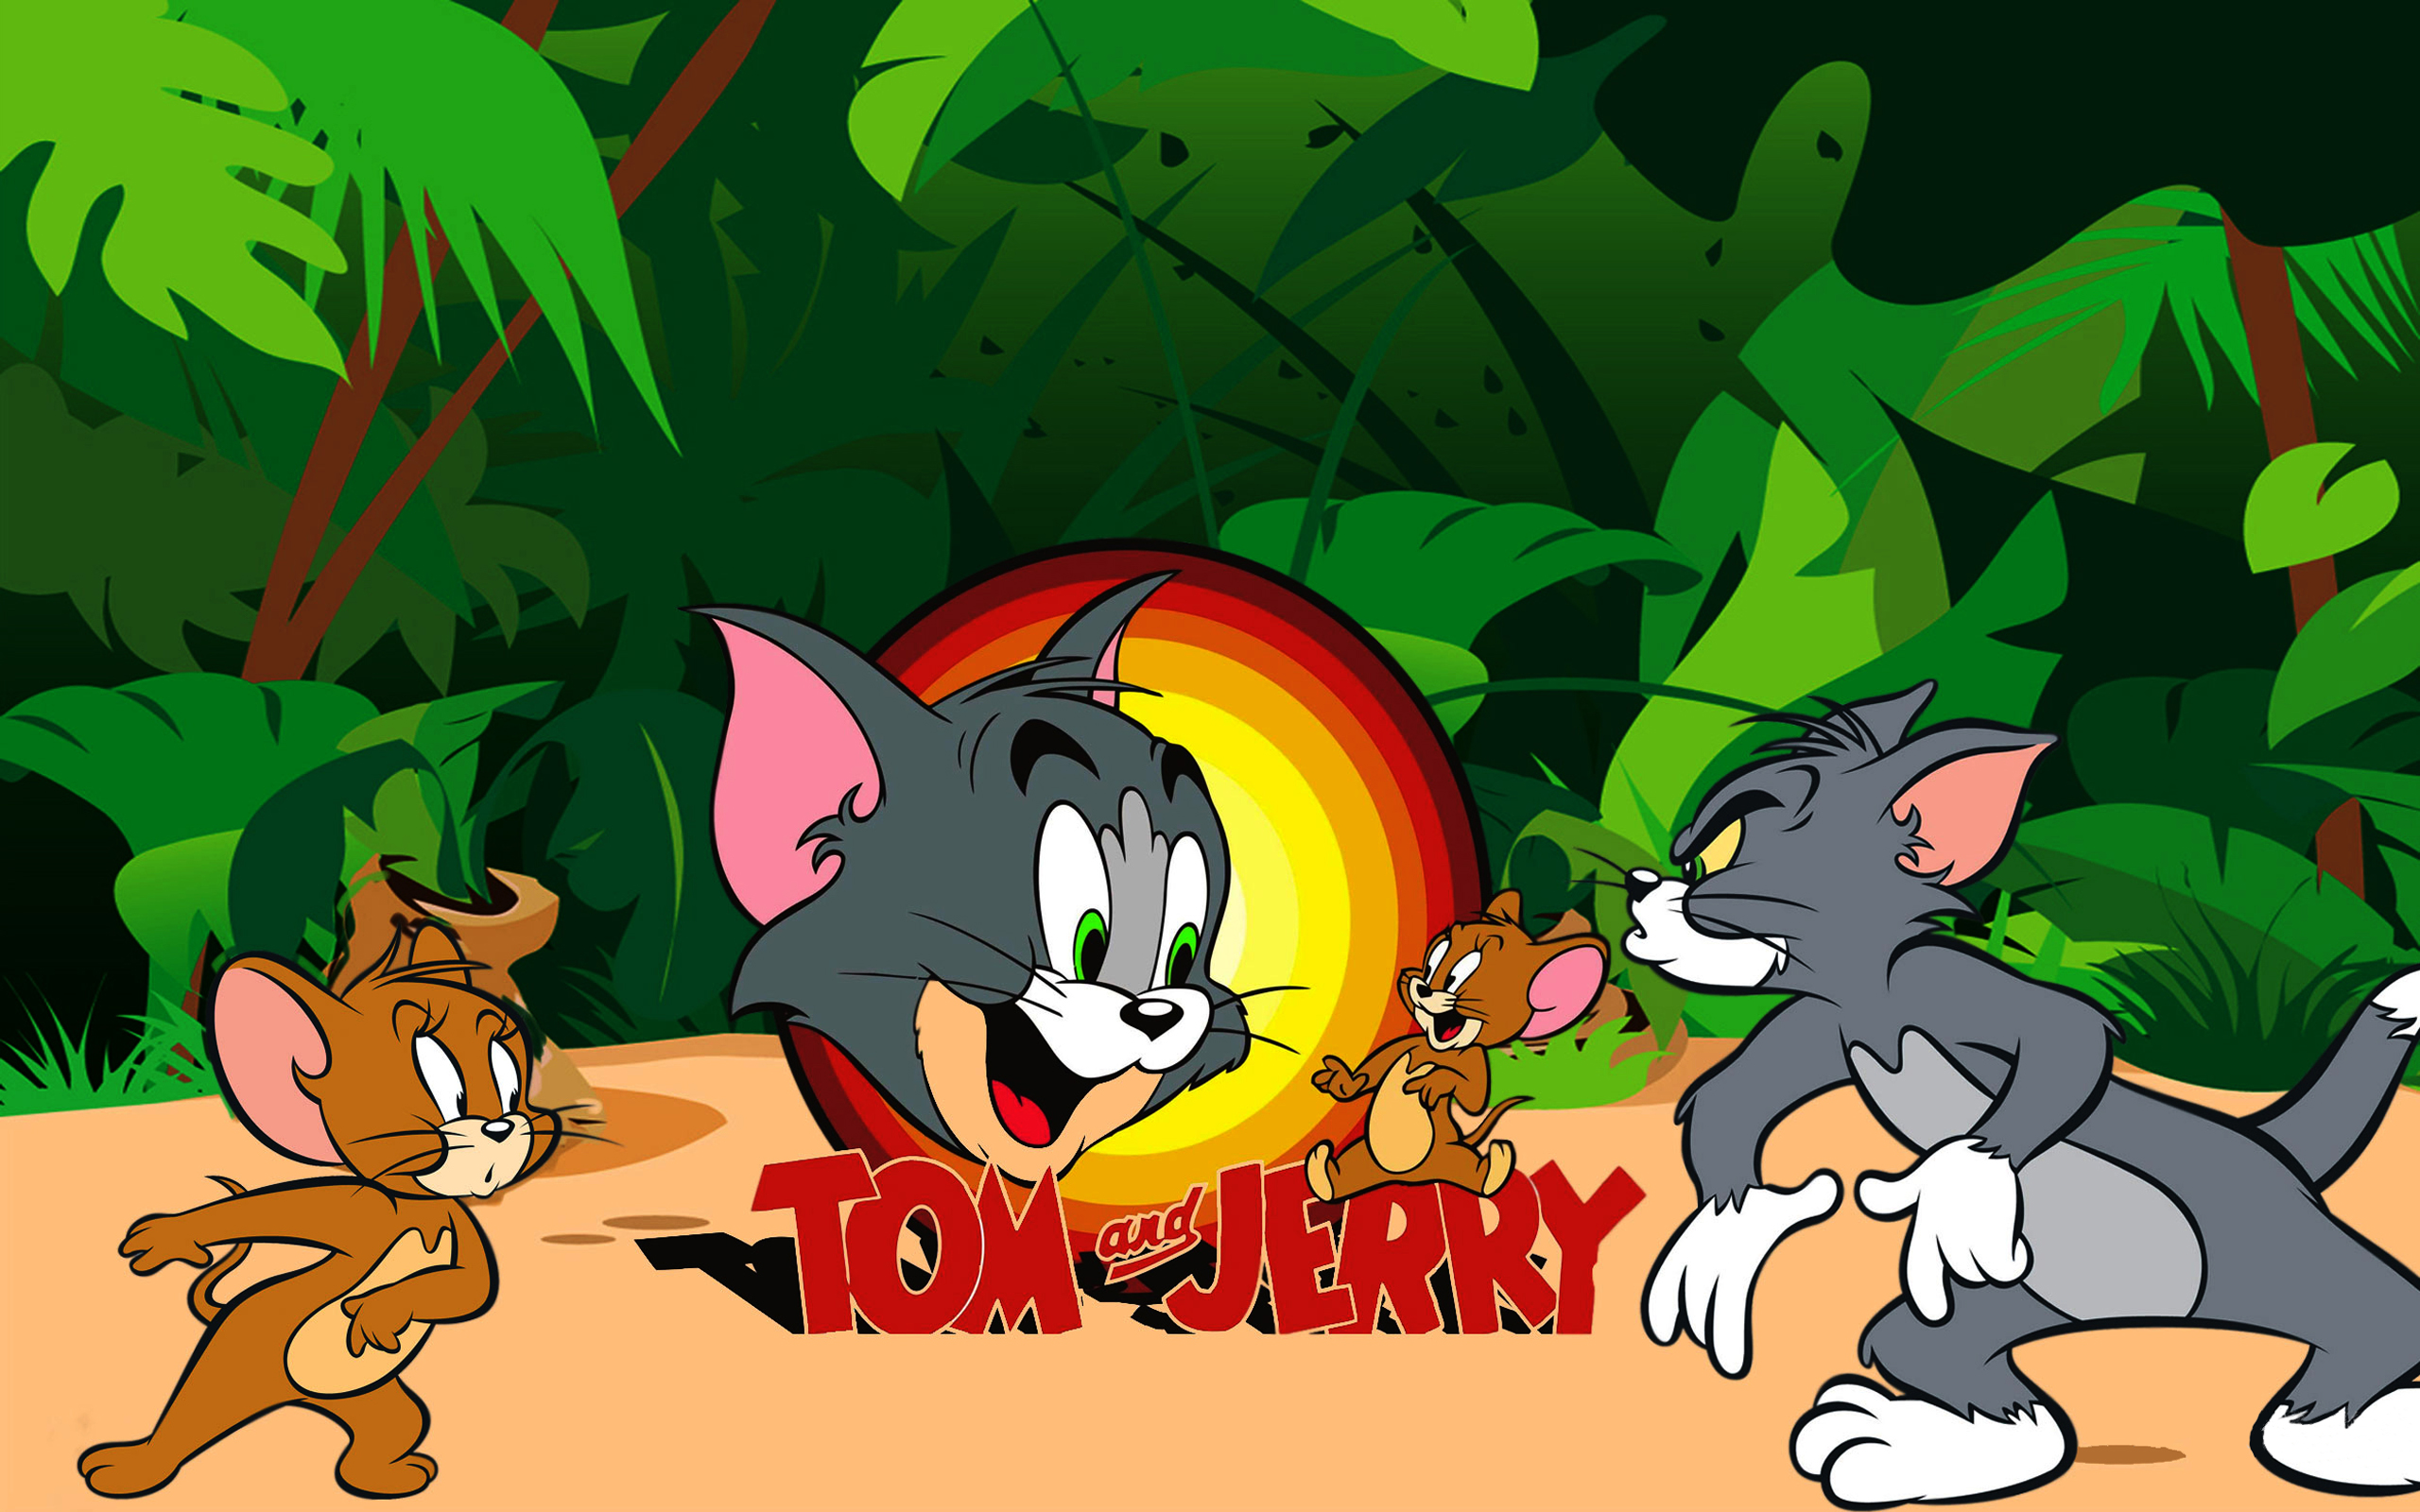 Tom And Jerry Cartoons For Children Full Hd Wallpapers 2560x1600.